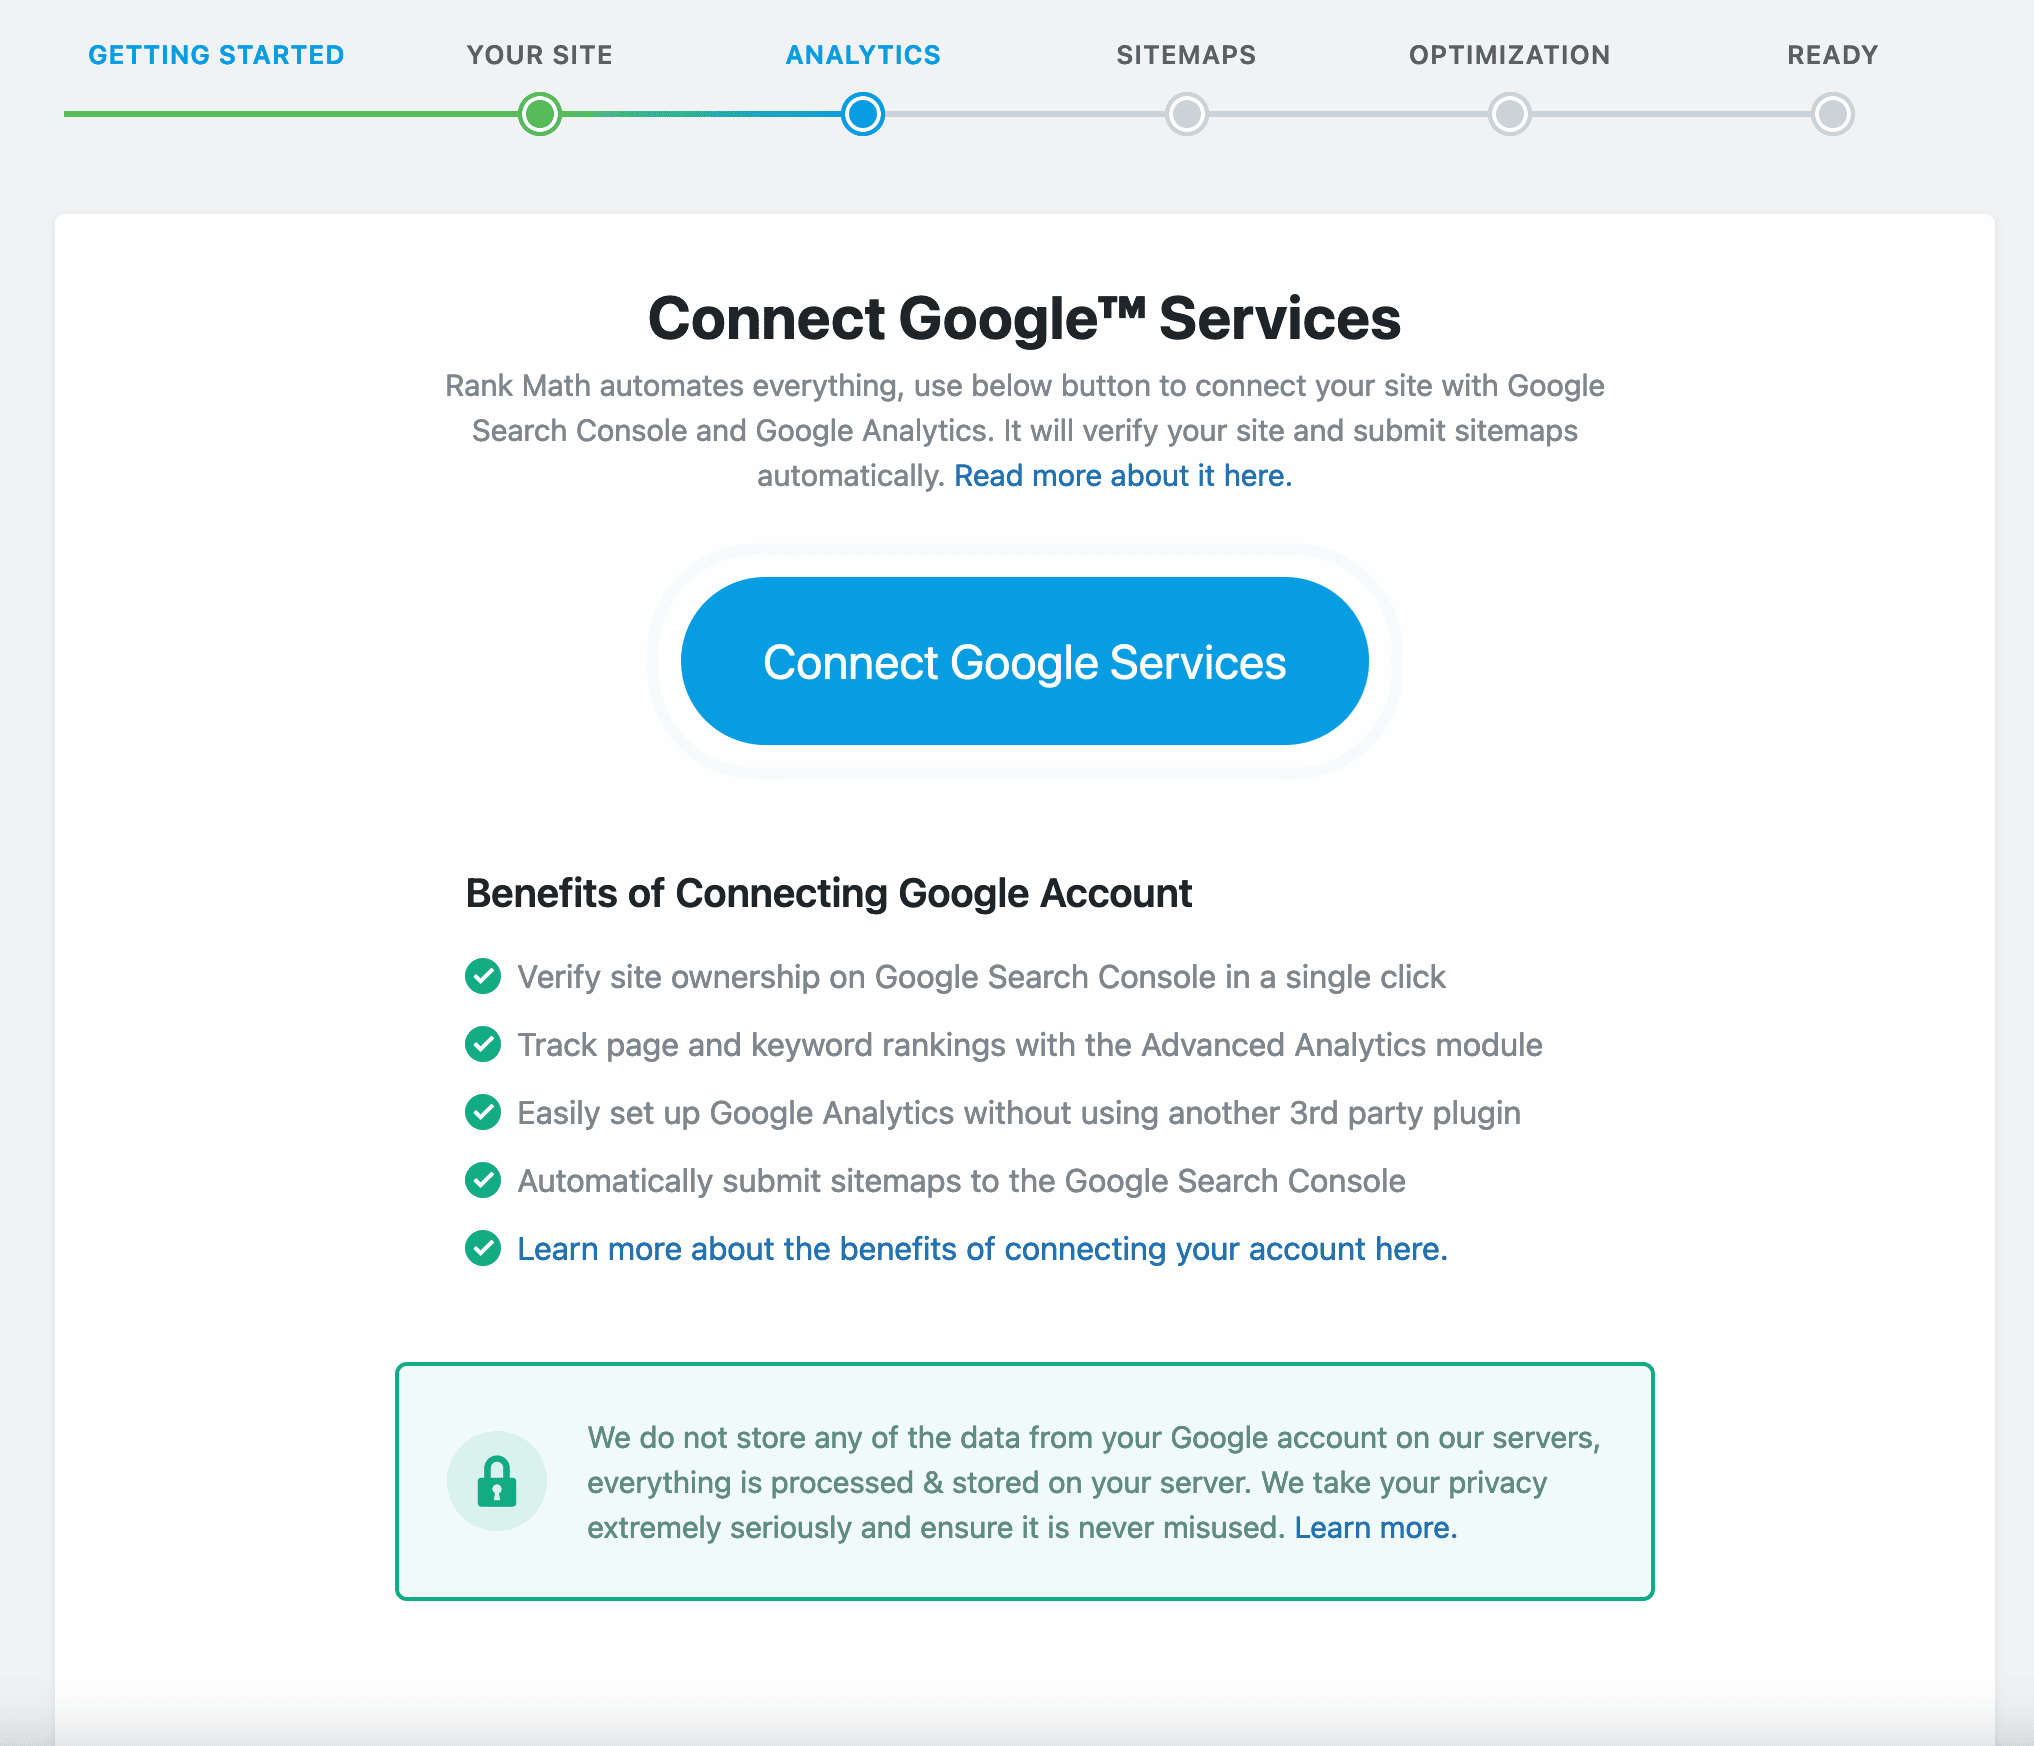 Connecting to Google Services with Rank Math SEO.